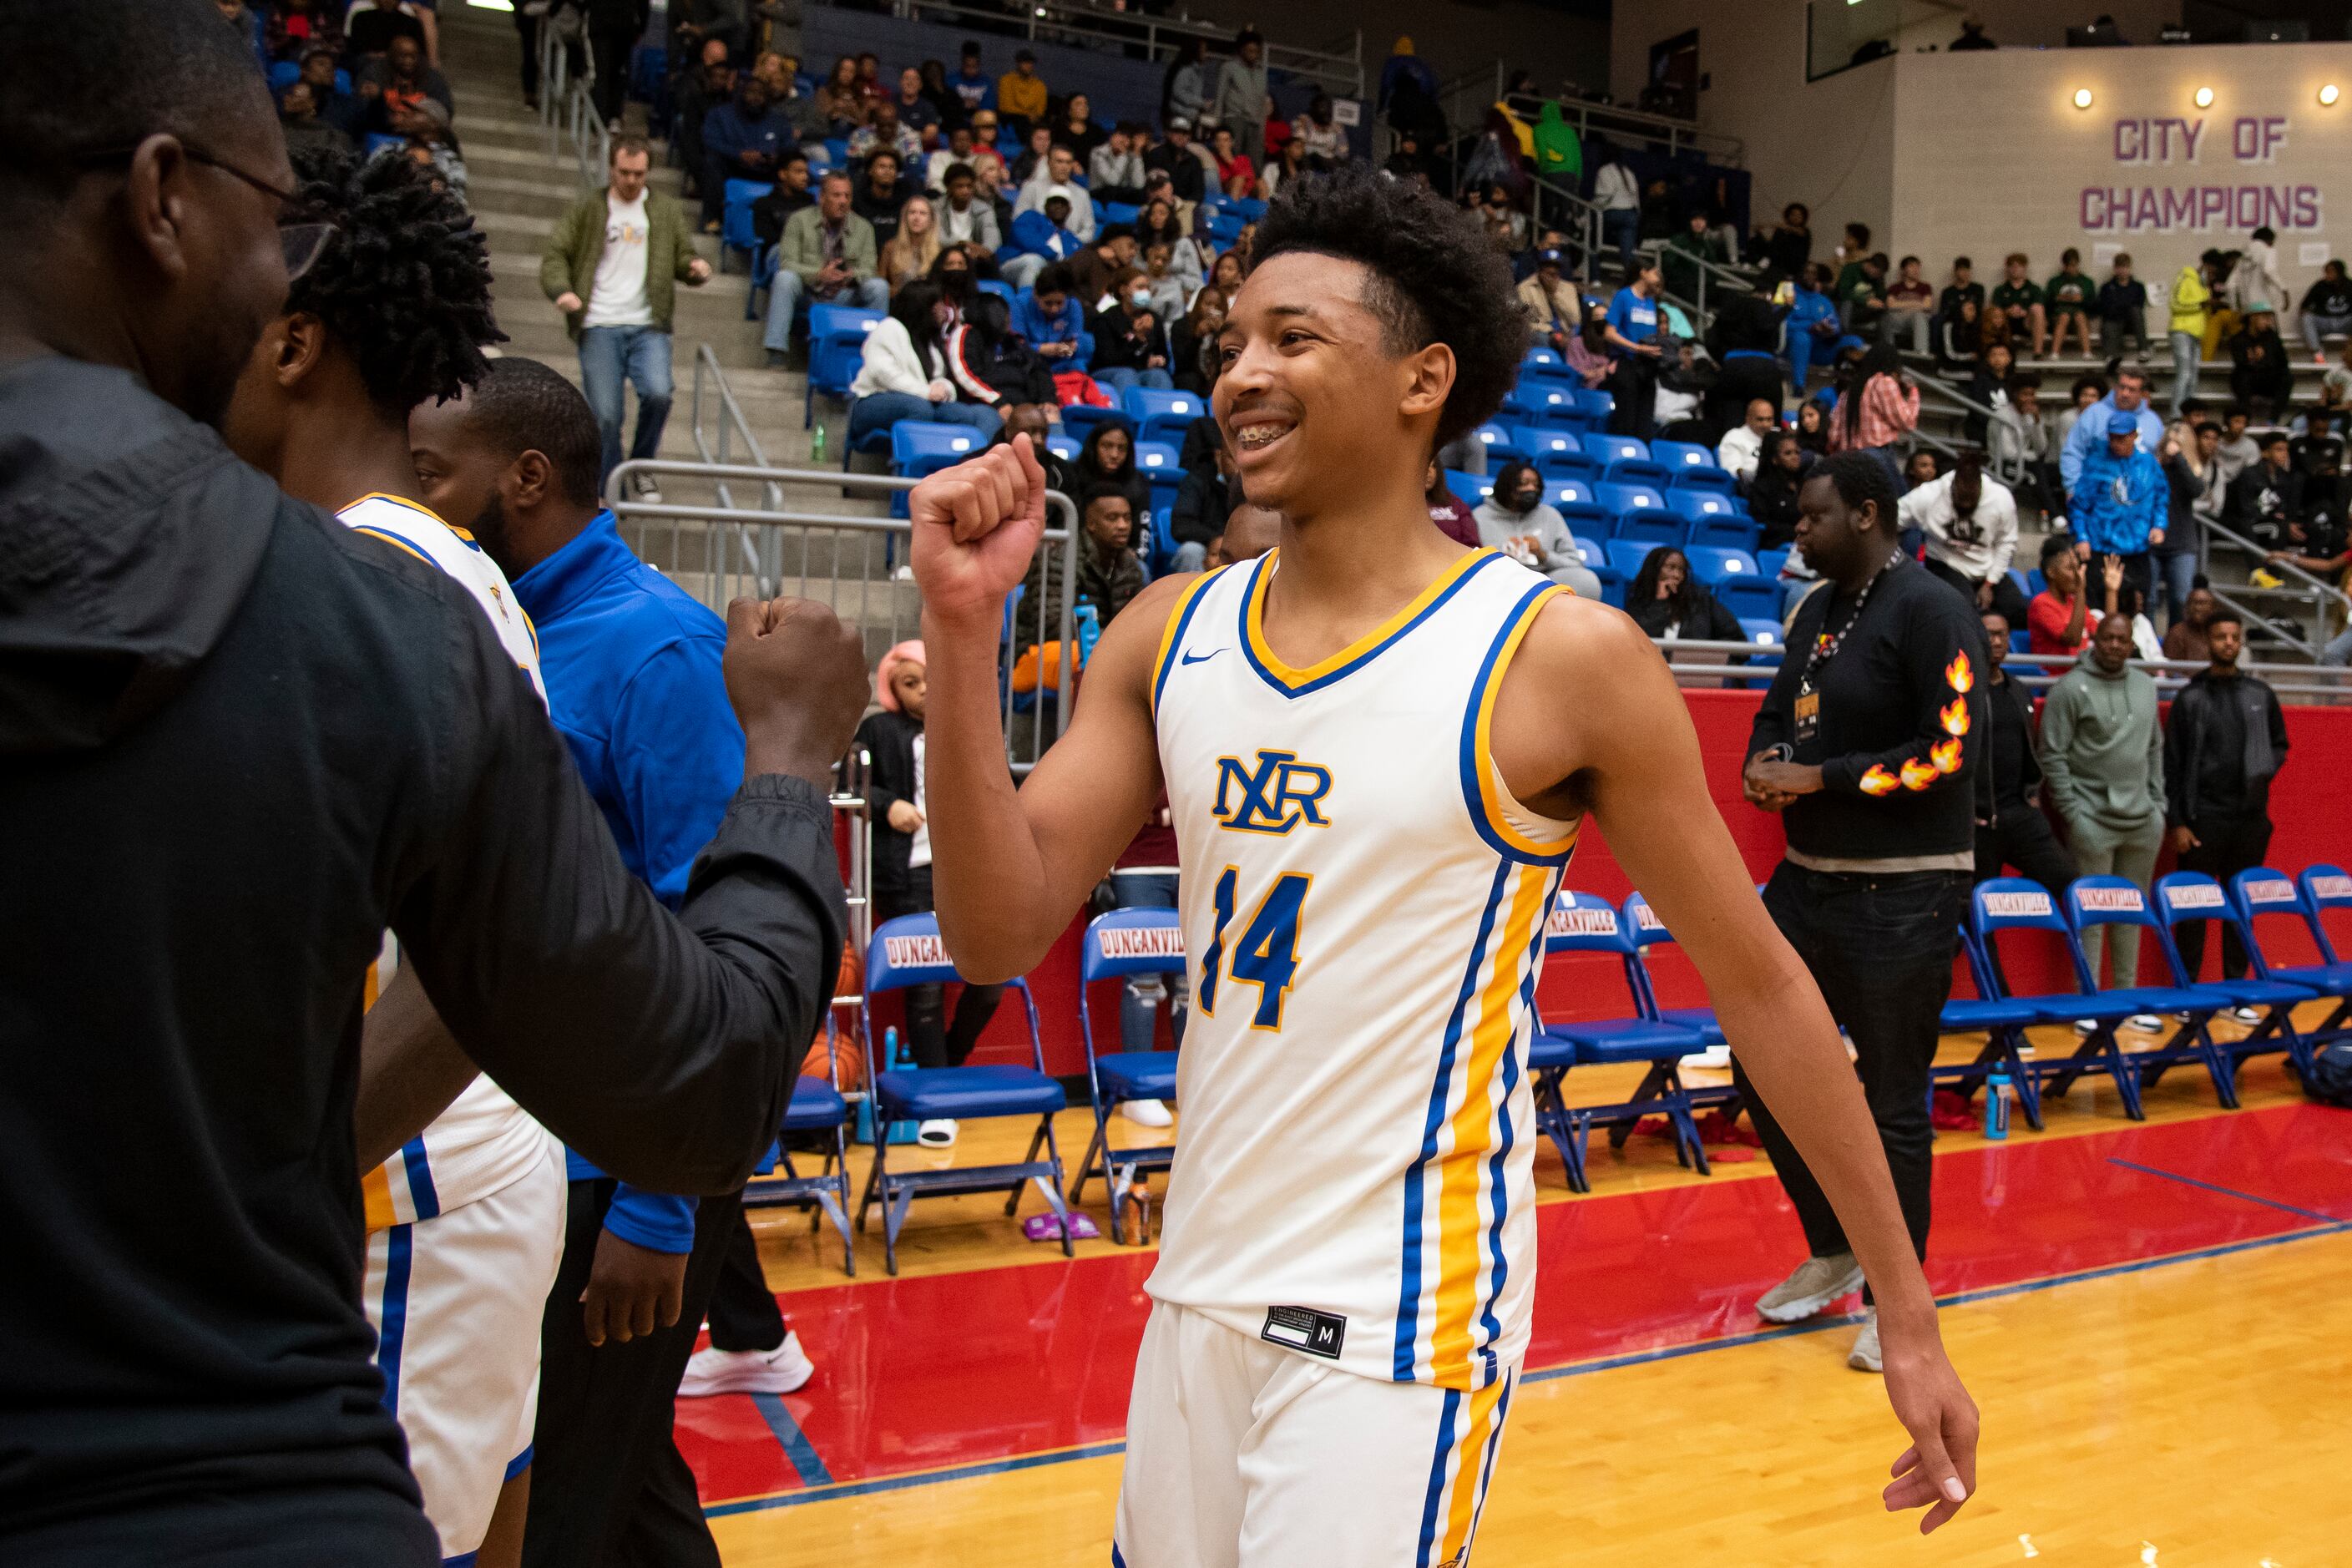 North Little Rock senior Nick Smith (14) fist bumps a teammate following Kimball's...